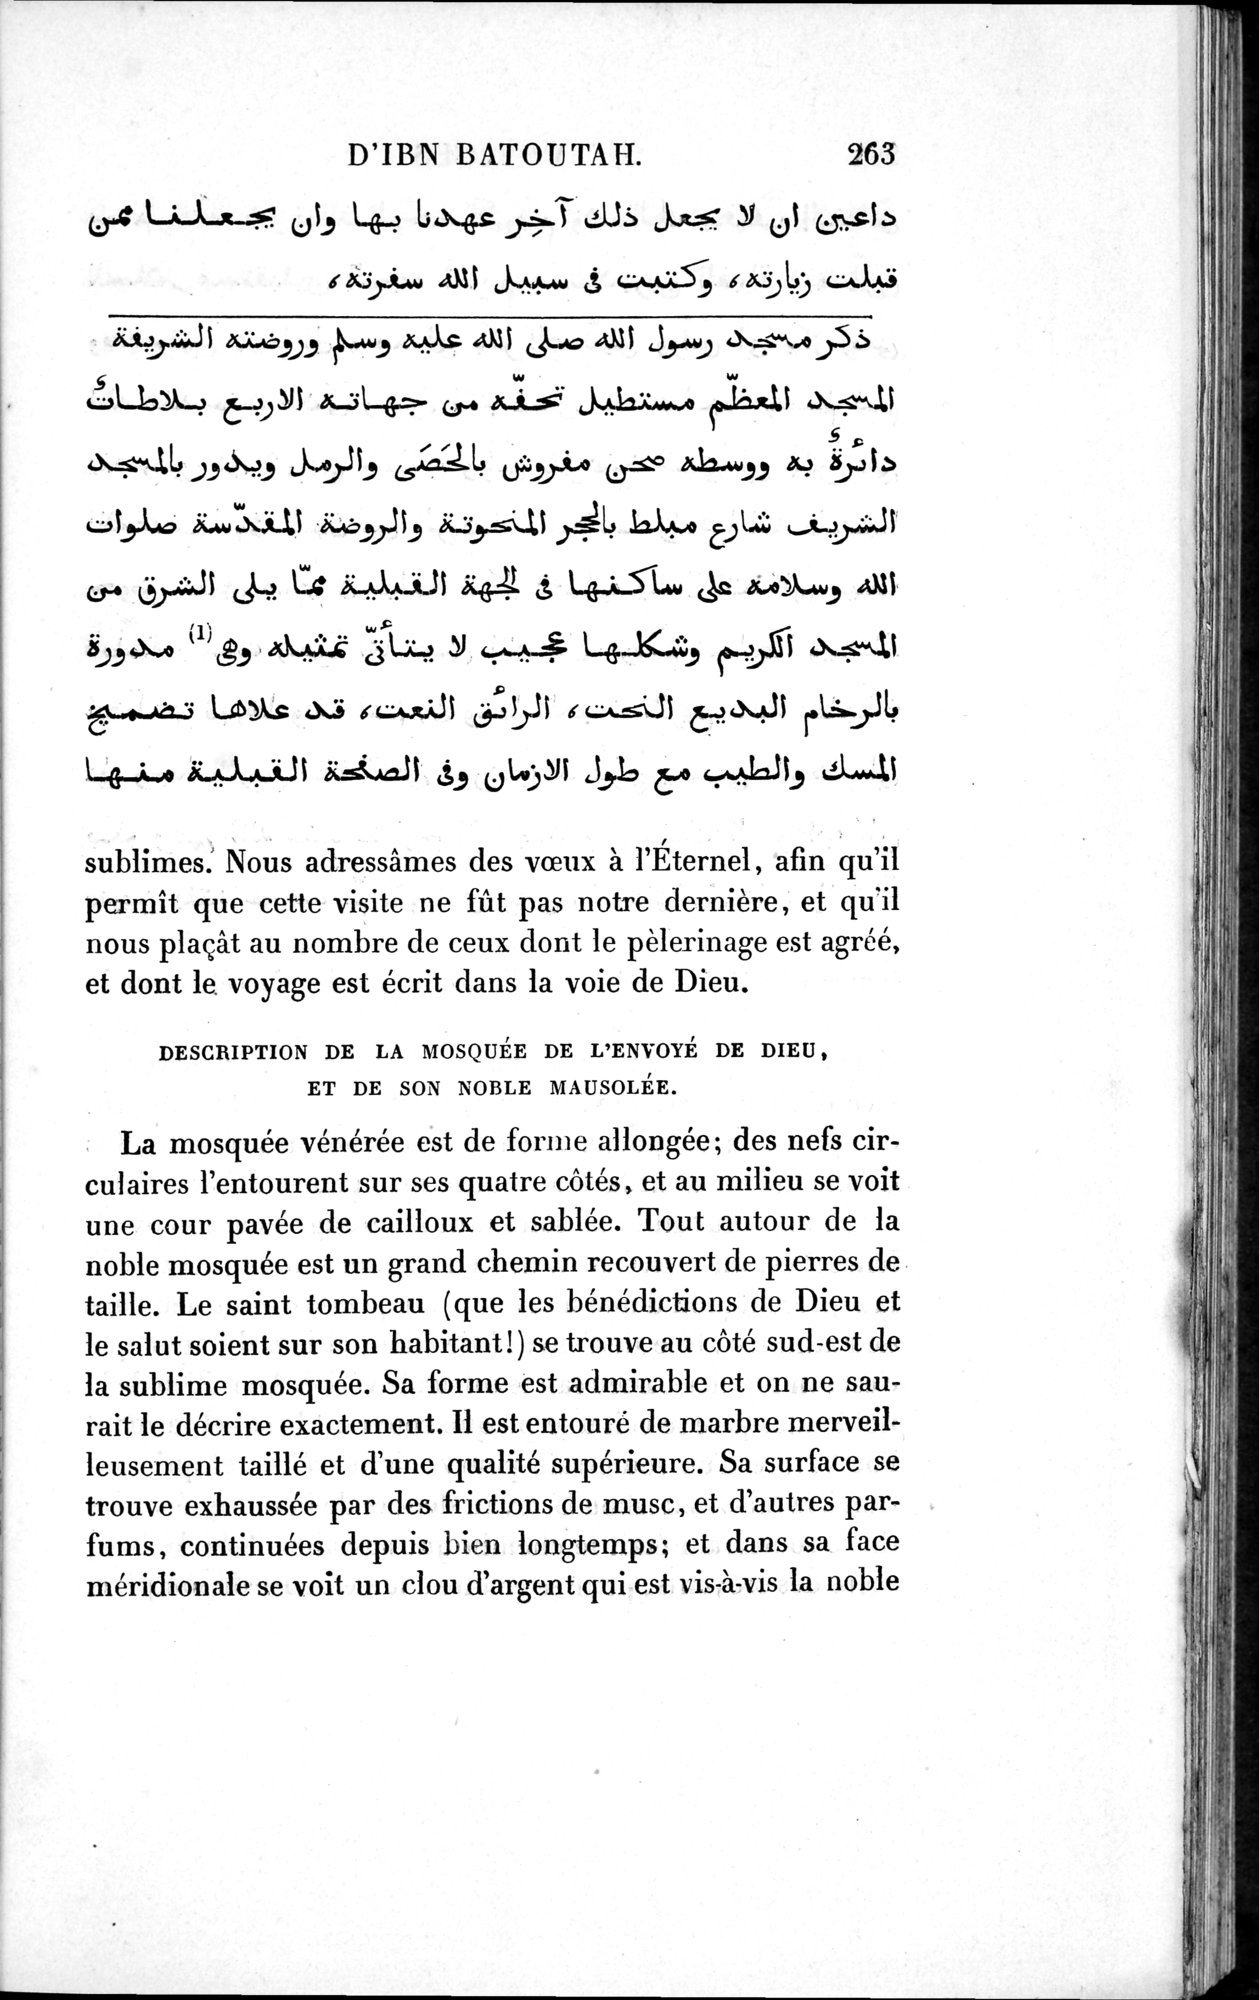 Voyages d'Ibn Batoutah : vol.1 / Page 323 (Grayscale High Resolution Image)